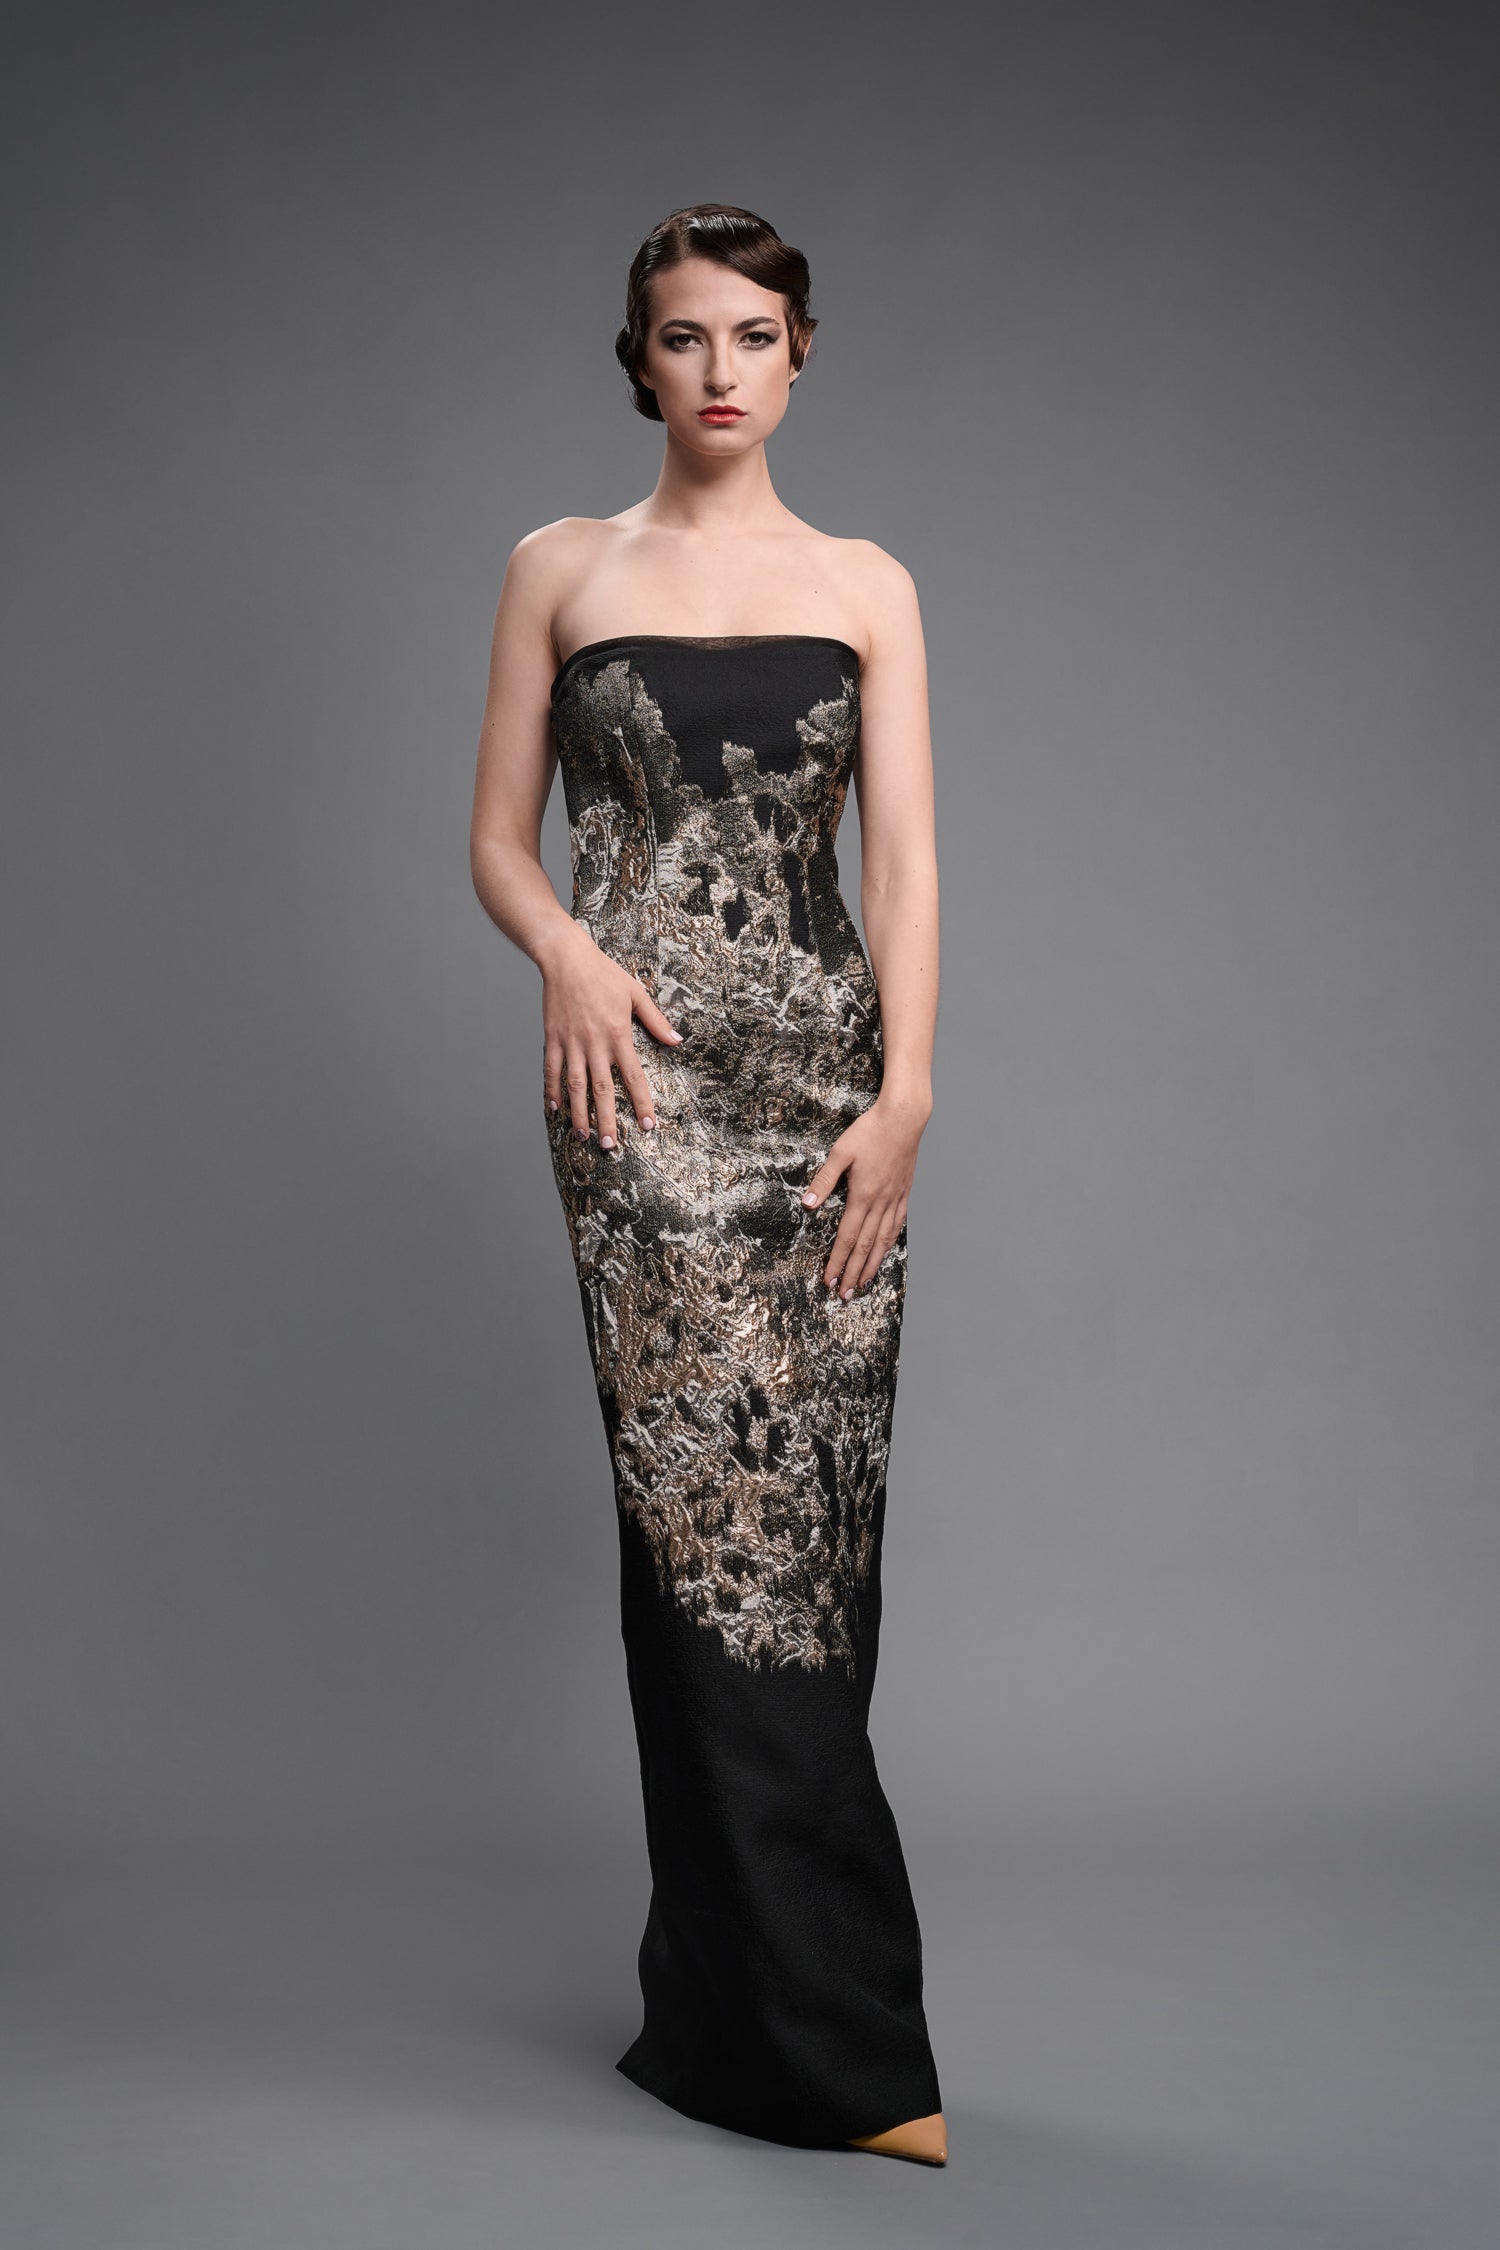 Alex Teih EVENING DRESSES, EVENING GOWNS, GOWNS, LONG DRESS, MOTHER OF THE BRIDE DRESS, MOTHER OF THE GROOM DRESS, WEDDING GUEST DRESSES, Long Island, New York, Plus size Mother of the Bride gowns near me, Woodbury Glen Cove Mother of the Bride dresses tea length, Macy's Mother Nordstrom Mother of the Bride, David's Bridal